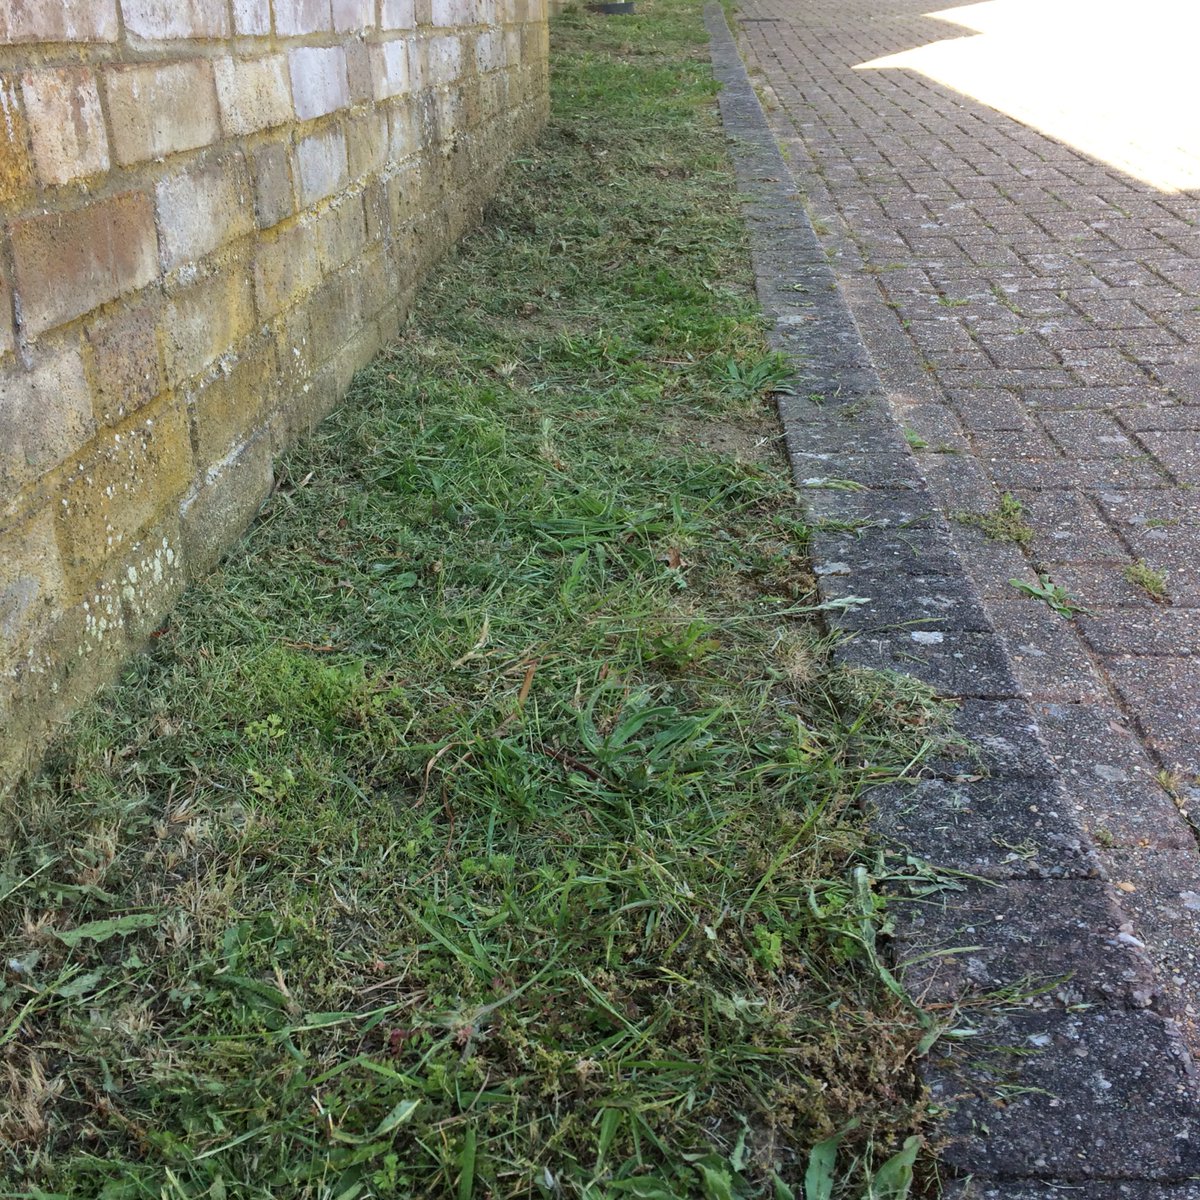 24 hours ago this tiny strip was full of Ox eye, Vetch, St Johns Wort, Lady’s Bedstraw, grasshopper nymphs and more. I guess twas too untidy. Scale this up to UK level and its one reason for wildlife decline. #greenspaces #wildlifegardening #insectdecline @LGSpace #biodiversity